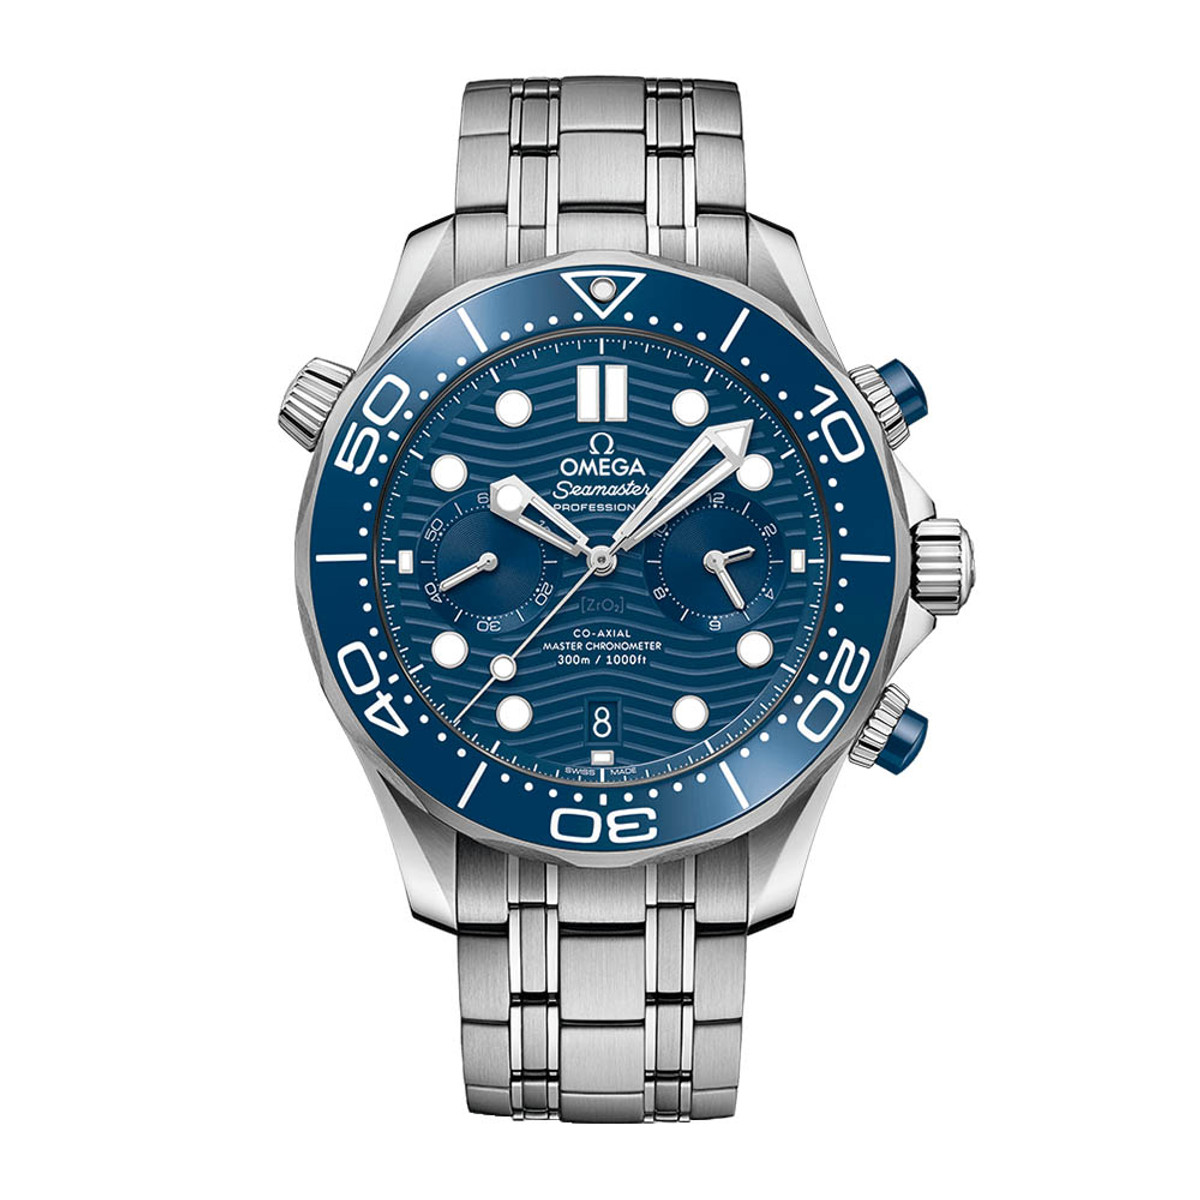 Omega Seamaster Diver 300M Chronograph 44mm 210.30.44.51.03.001-WOMG0895 Product Image